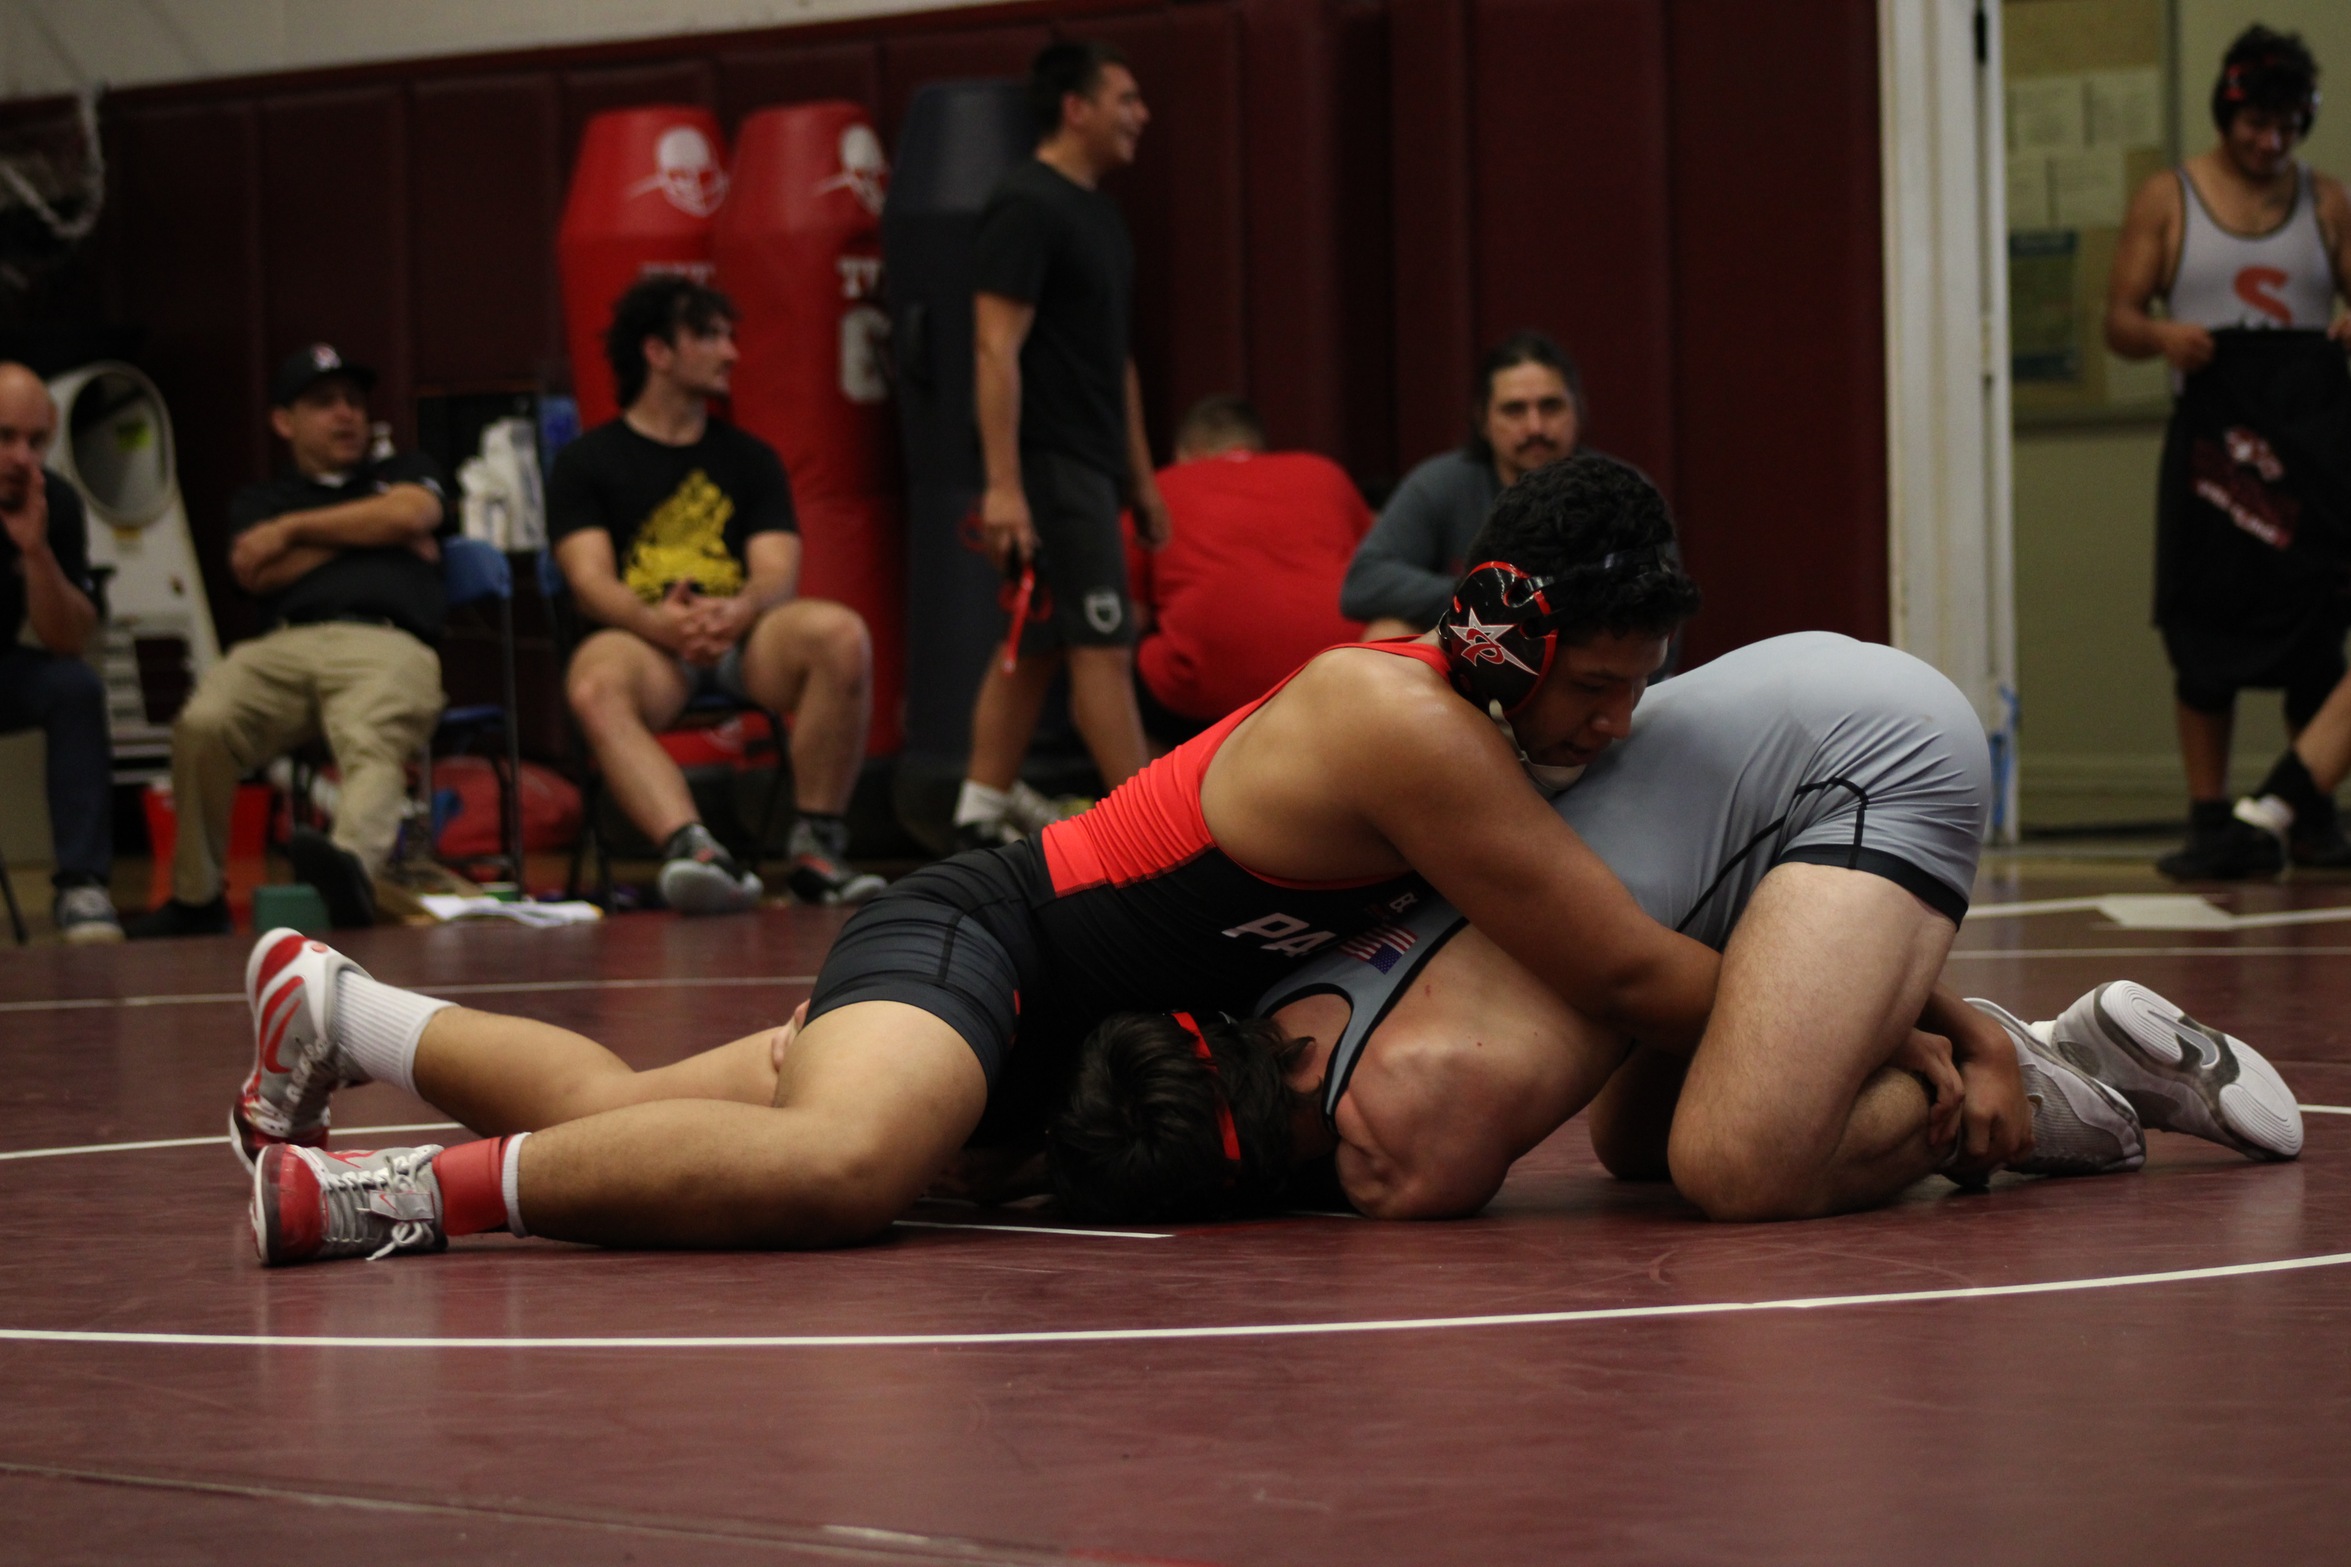 Daniel Hernandez finished the weekend 4-0 for the Comets. Photo provided by Tim Box.